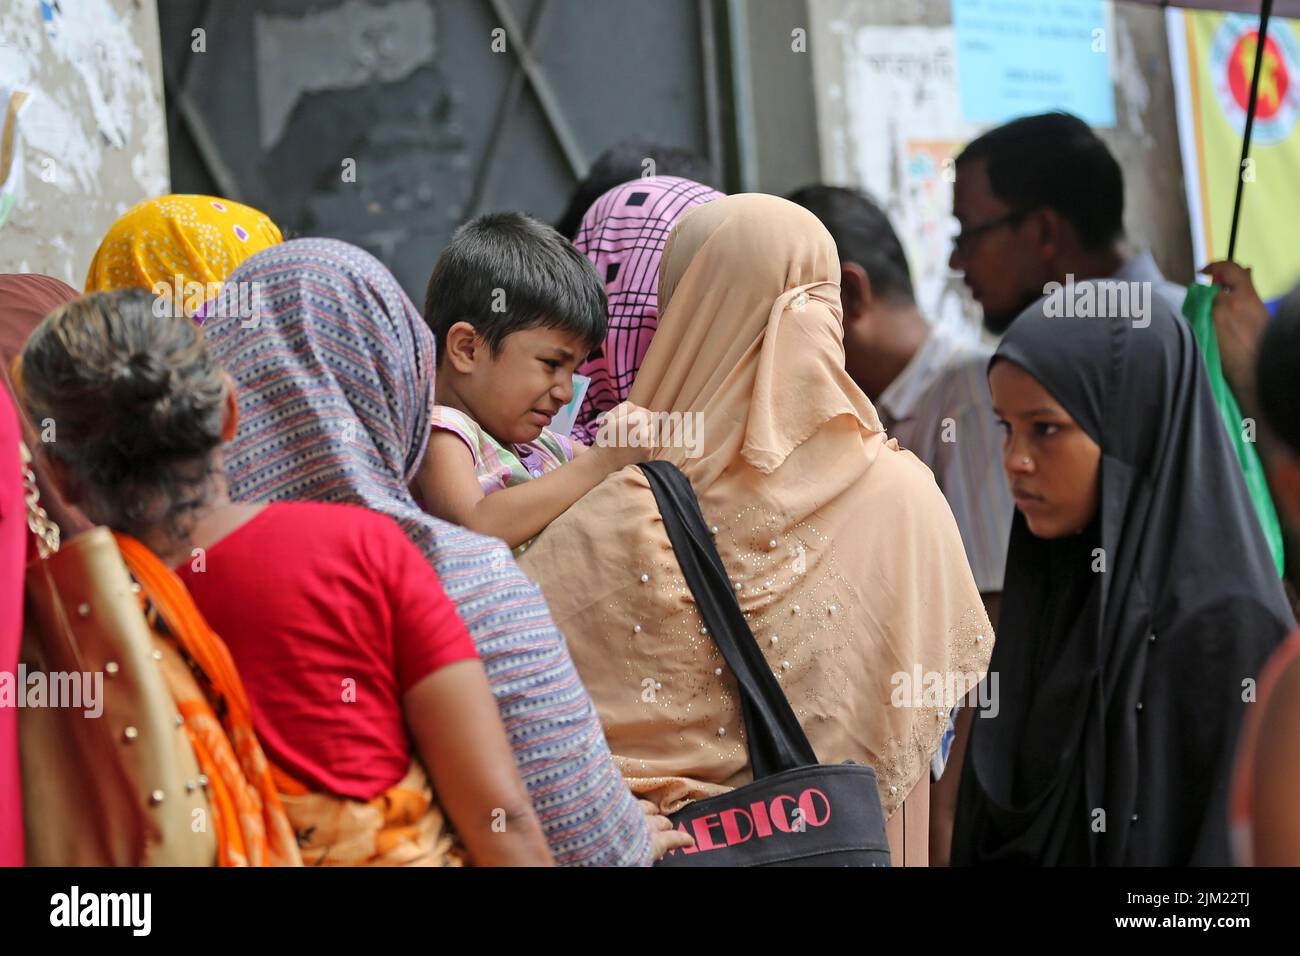 Overcrowding of people at the TCB biponon kendra [food sell center] in Ward No. 10 of Motijheel in the capital to collect products,Bangladesh. As the Stock Photo